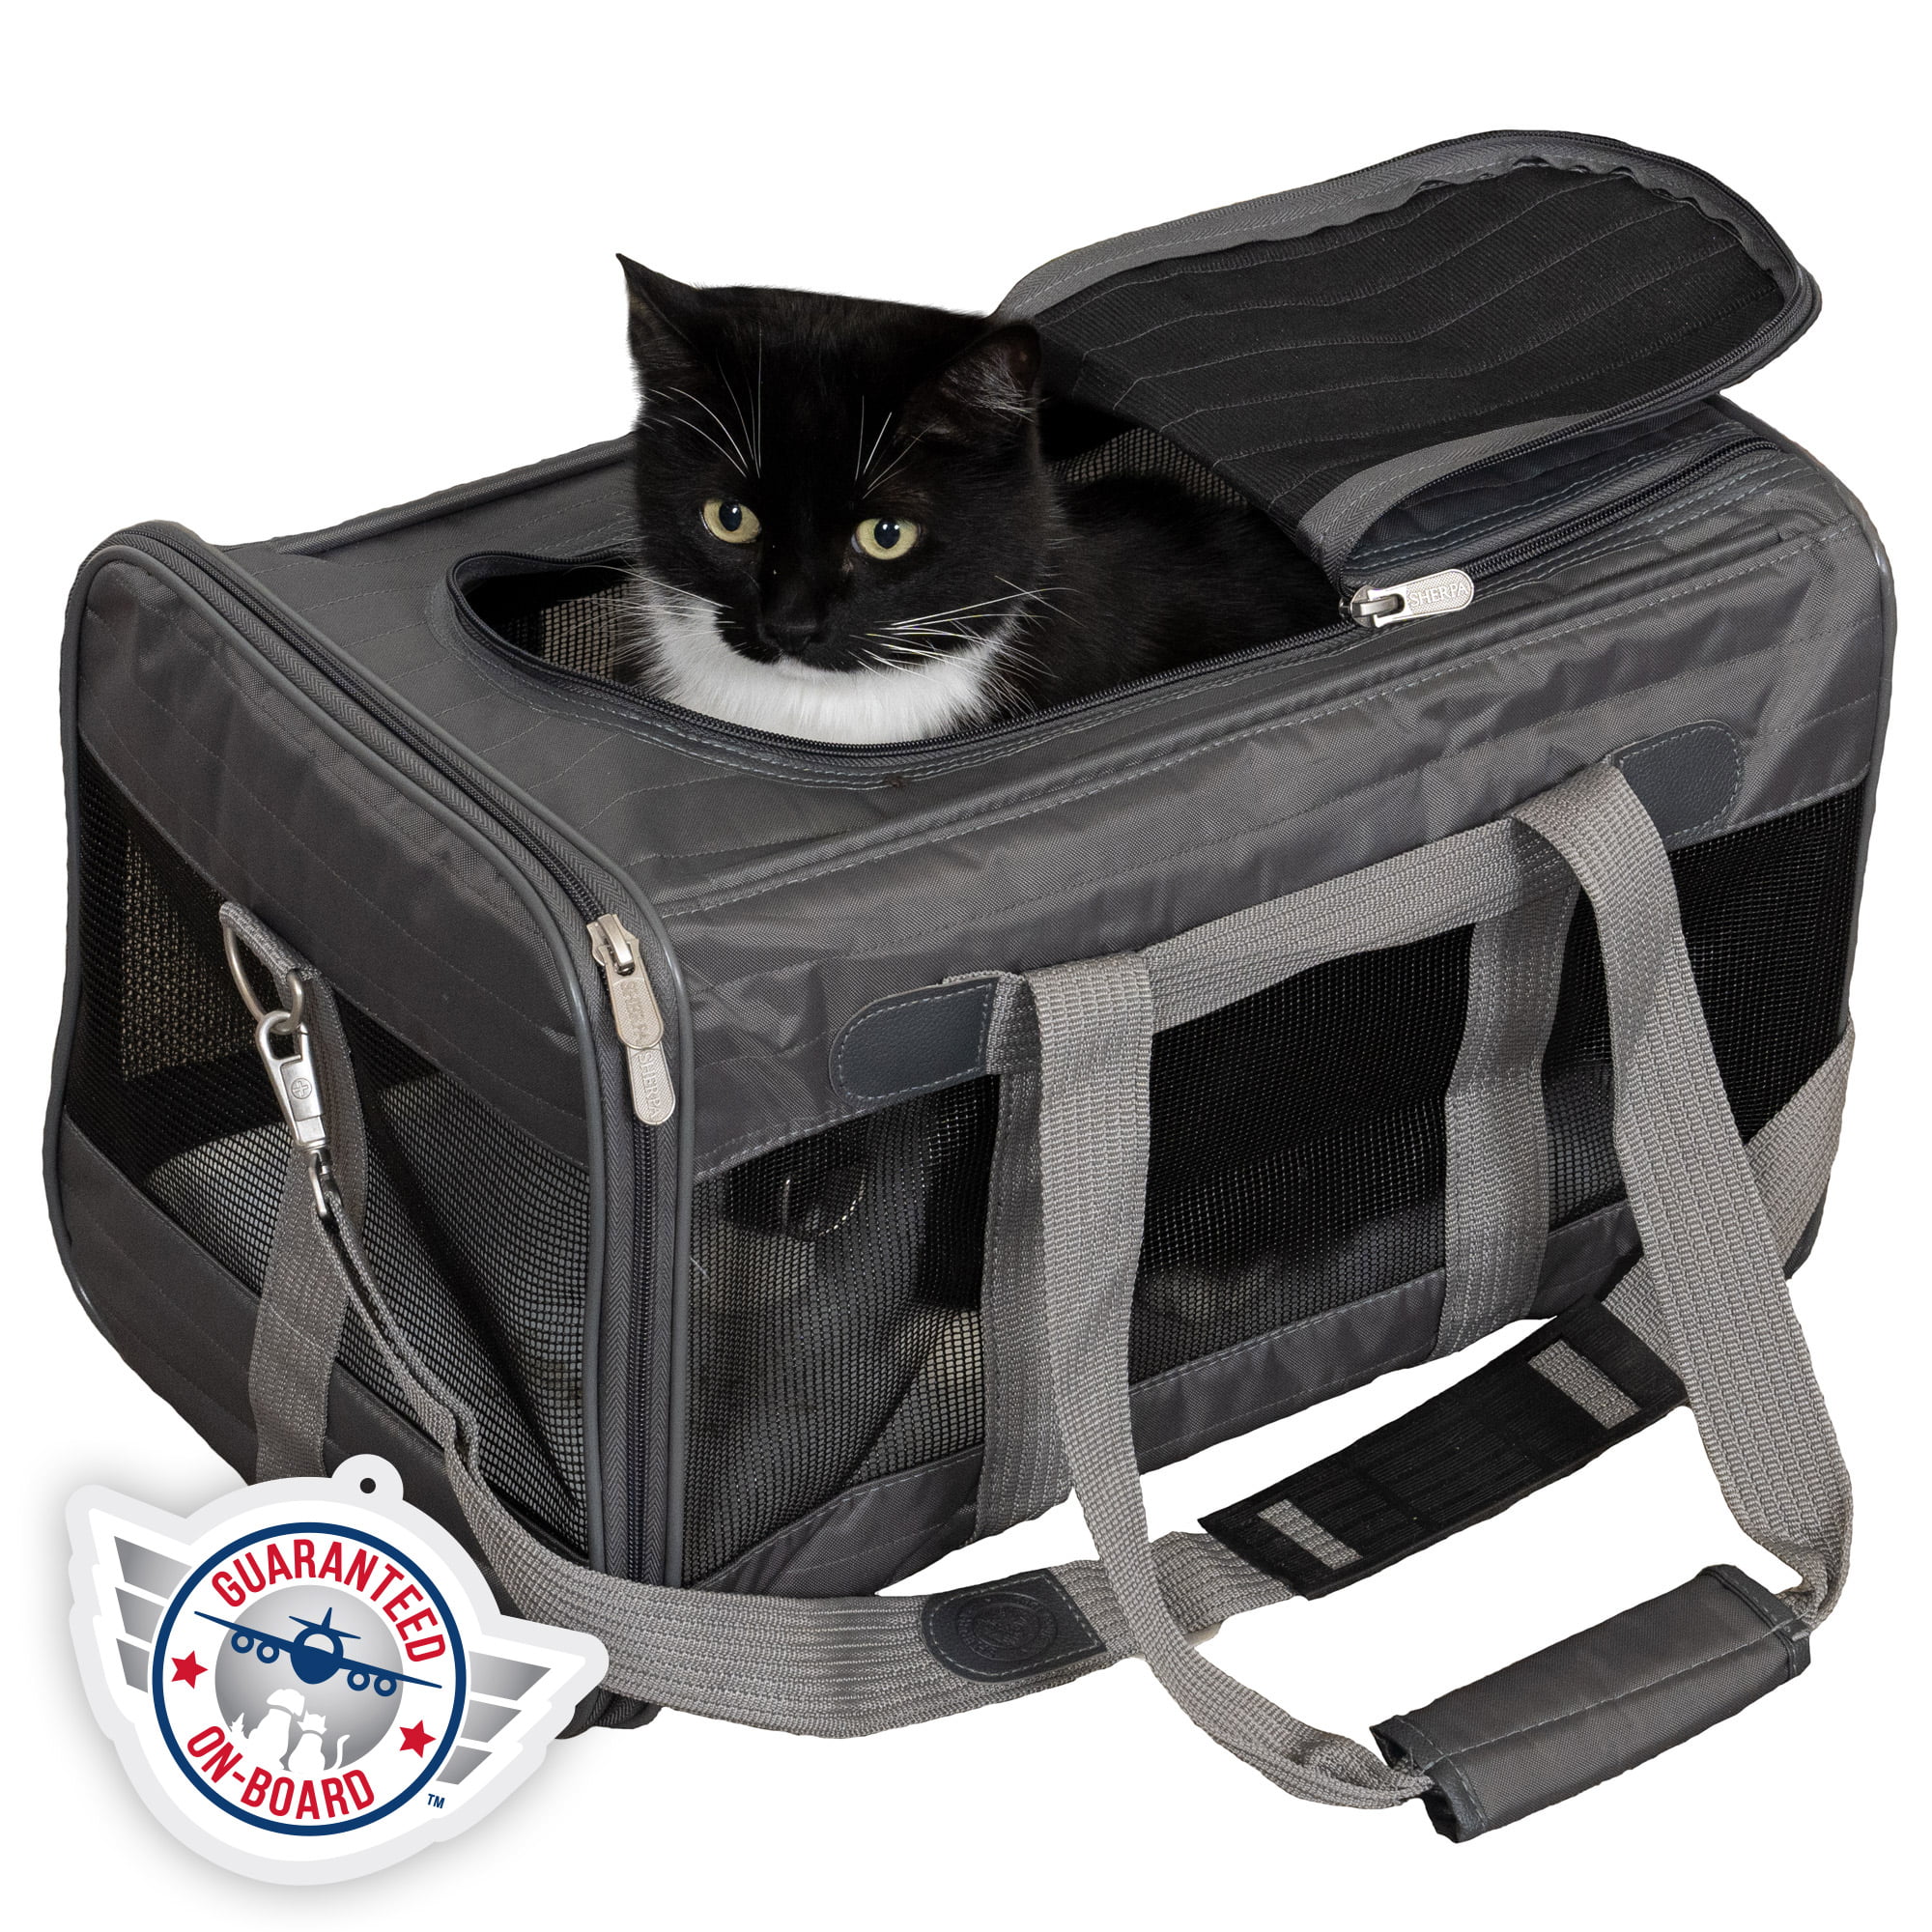  Sherpa Tote Around Town Travel Pet Carrier with Stay Clean  Technology - Black, Small : Pet Supplies